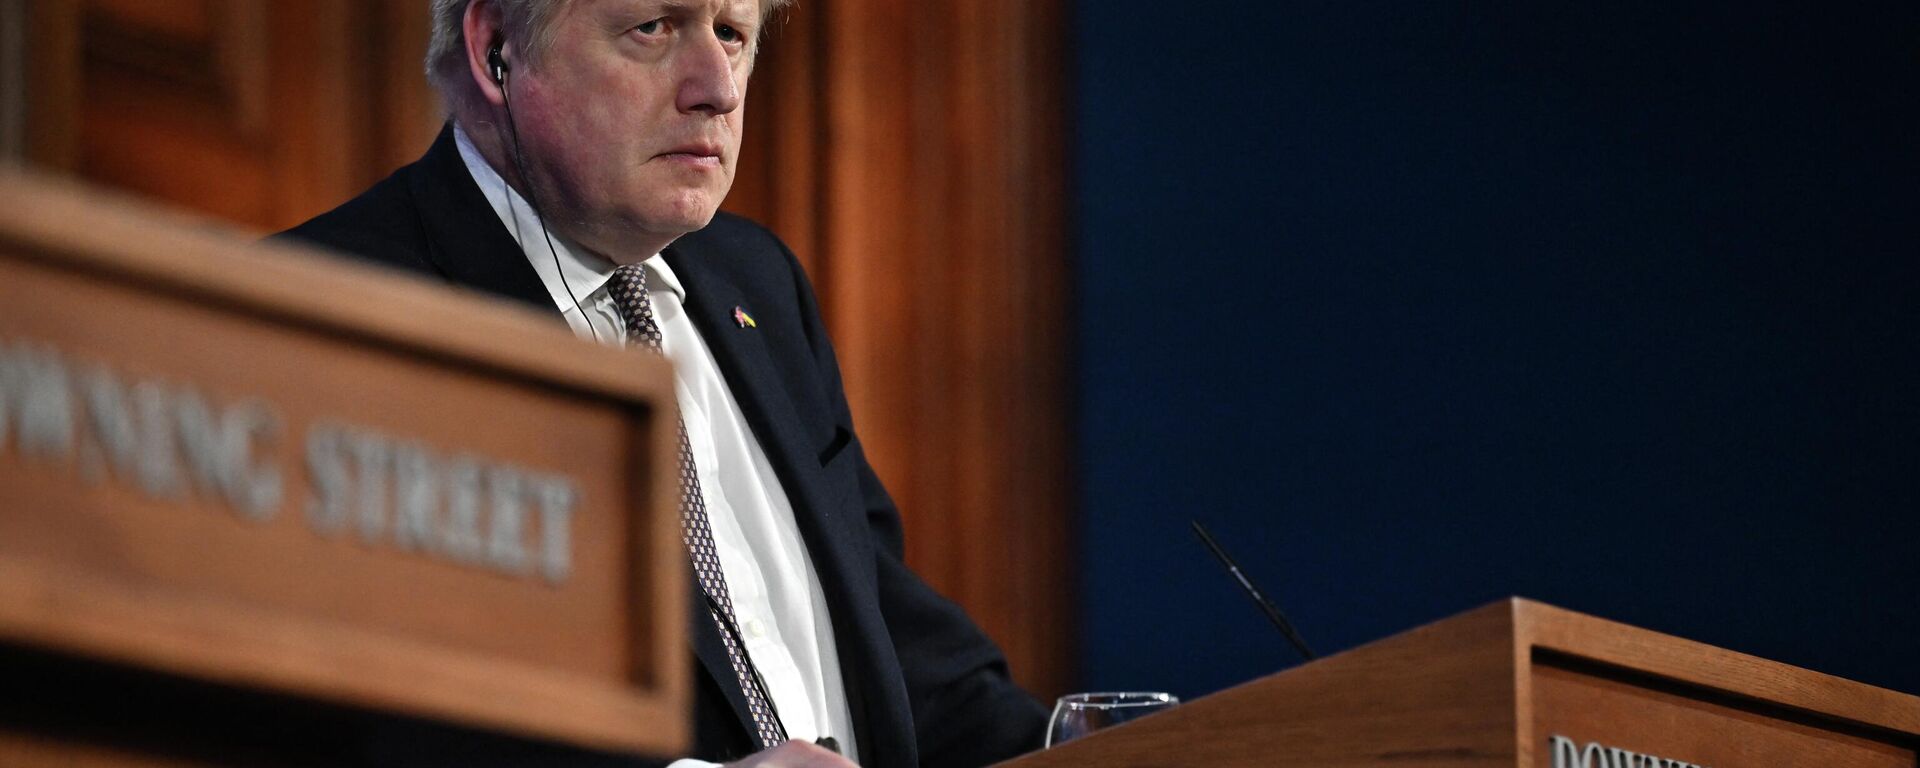 Britain's Prime Minister Boris Johnson speaks at a joint press conference with Germany's Chancellor Olaf Scholz inside the Downing Street briefing room following a bilateral meeting at 10 Downing Street, in London, on April 8, 2022 - Sputnik International, 1920, 14.04.2022